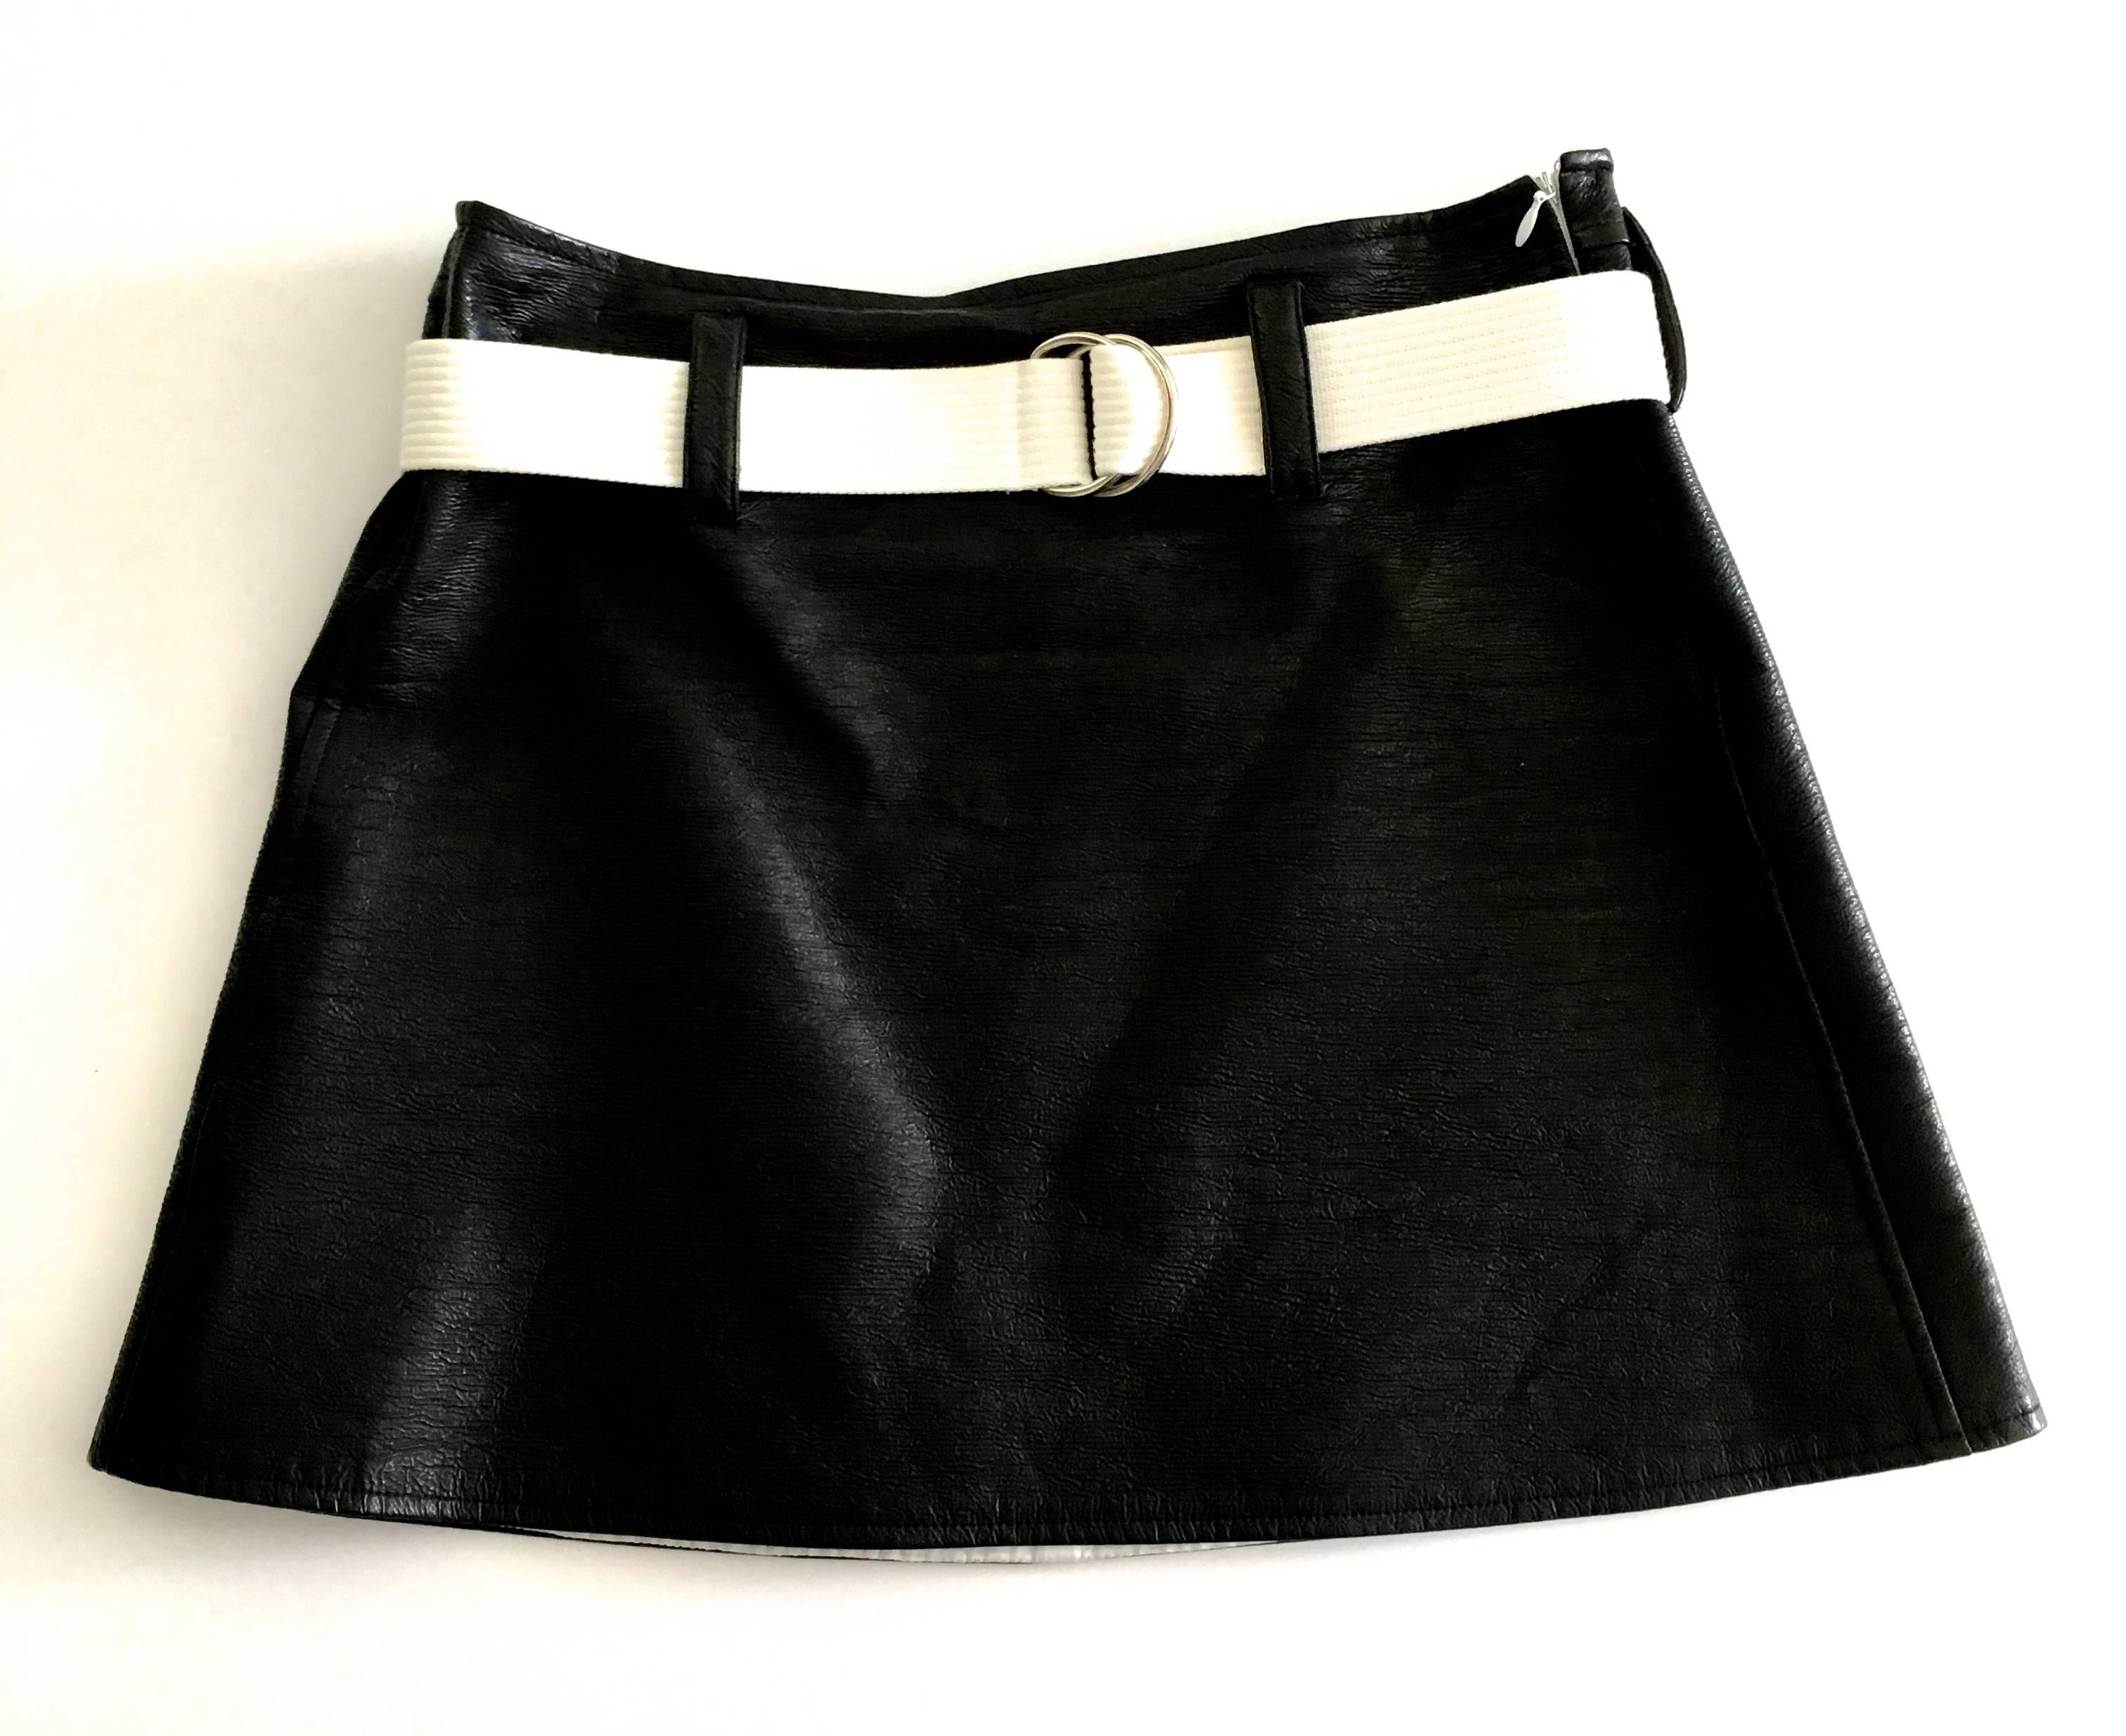 Presented here is a sultry mini skirt by Courreges Paris from the 1980's. This iconic mini skirt is made from black patent leather with white trim. The skirt is fully lined. The skirt has a gorgeous white fabric belt with it that is size adjustable.